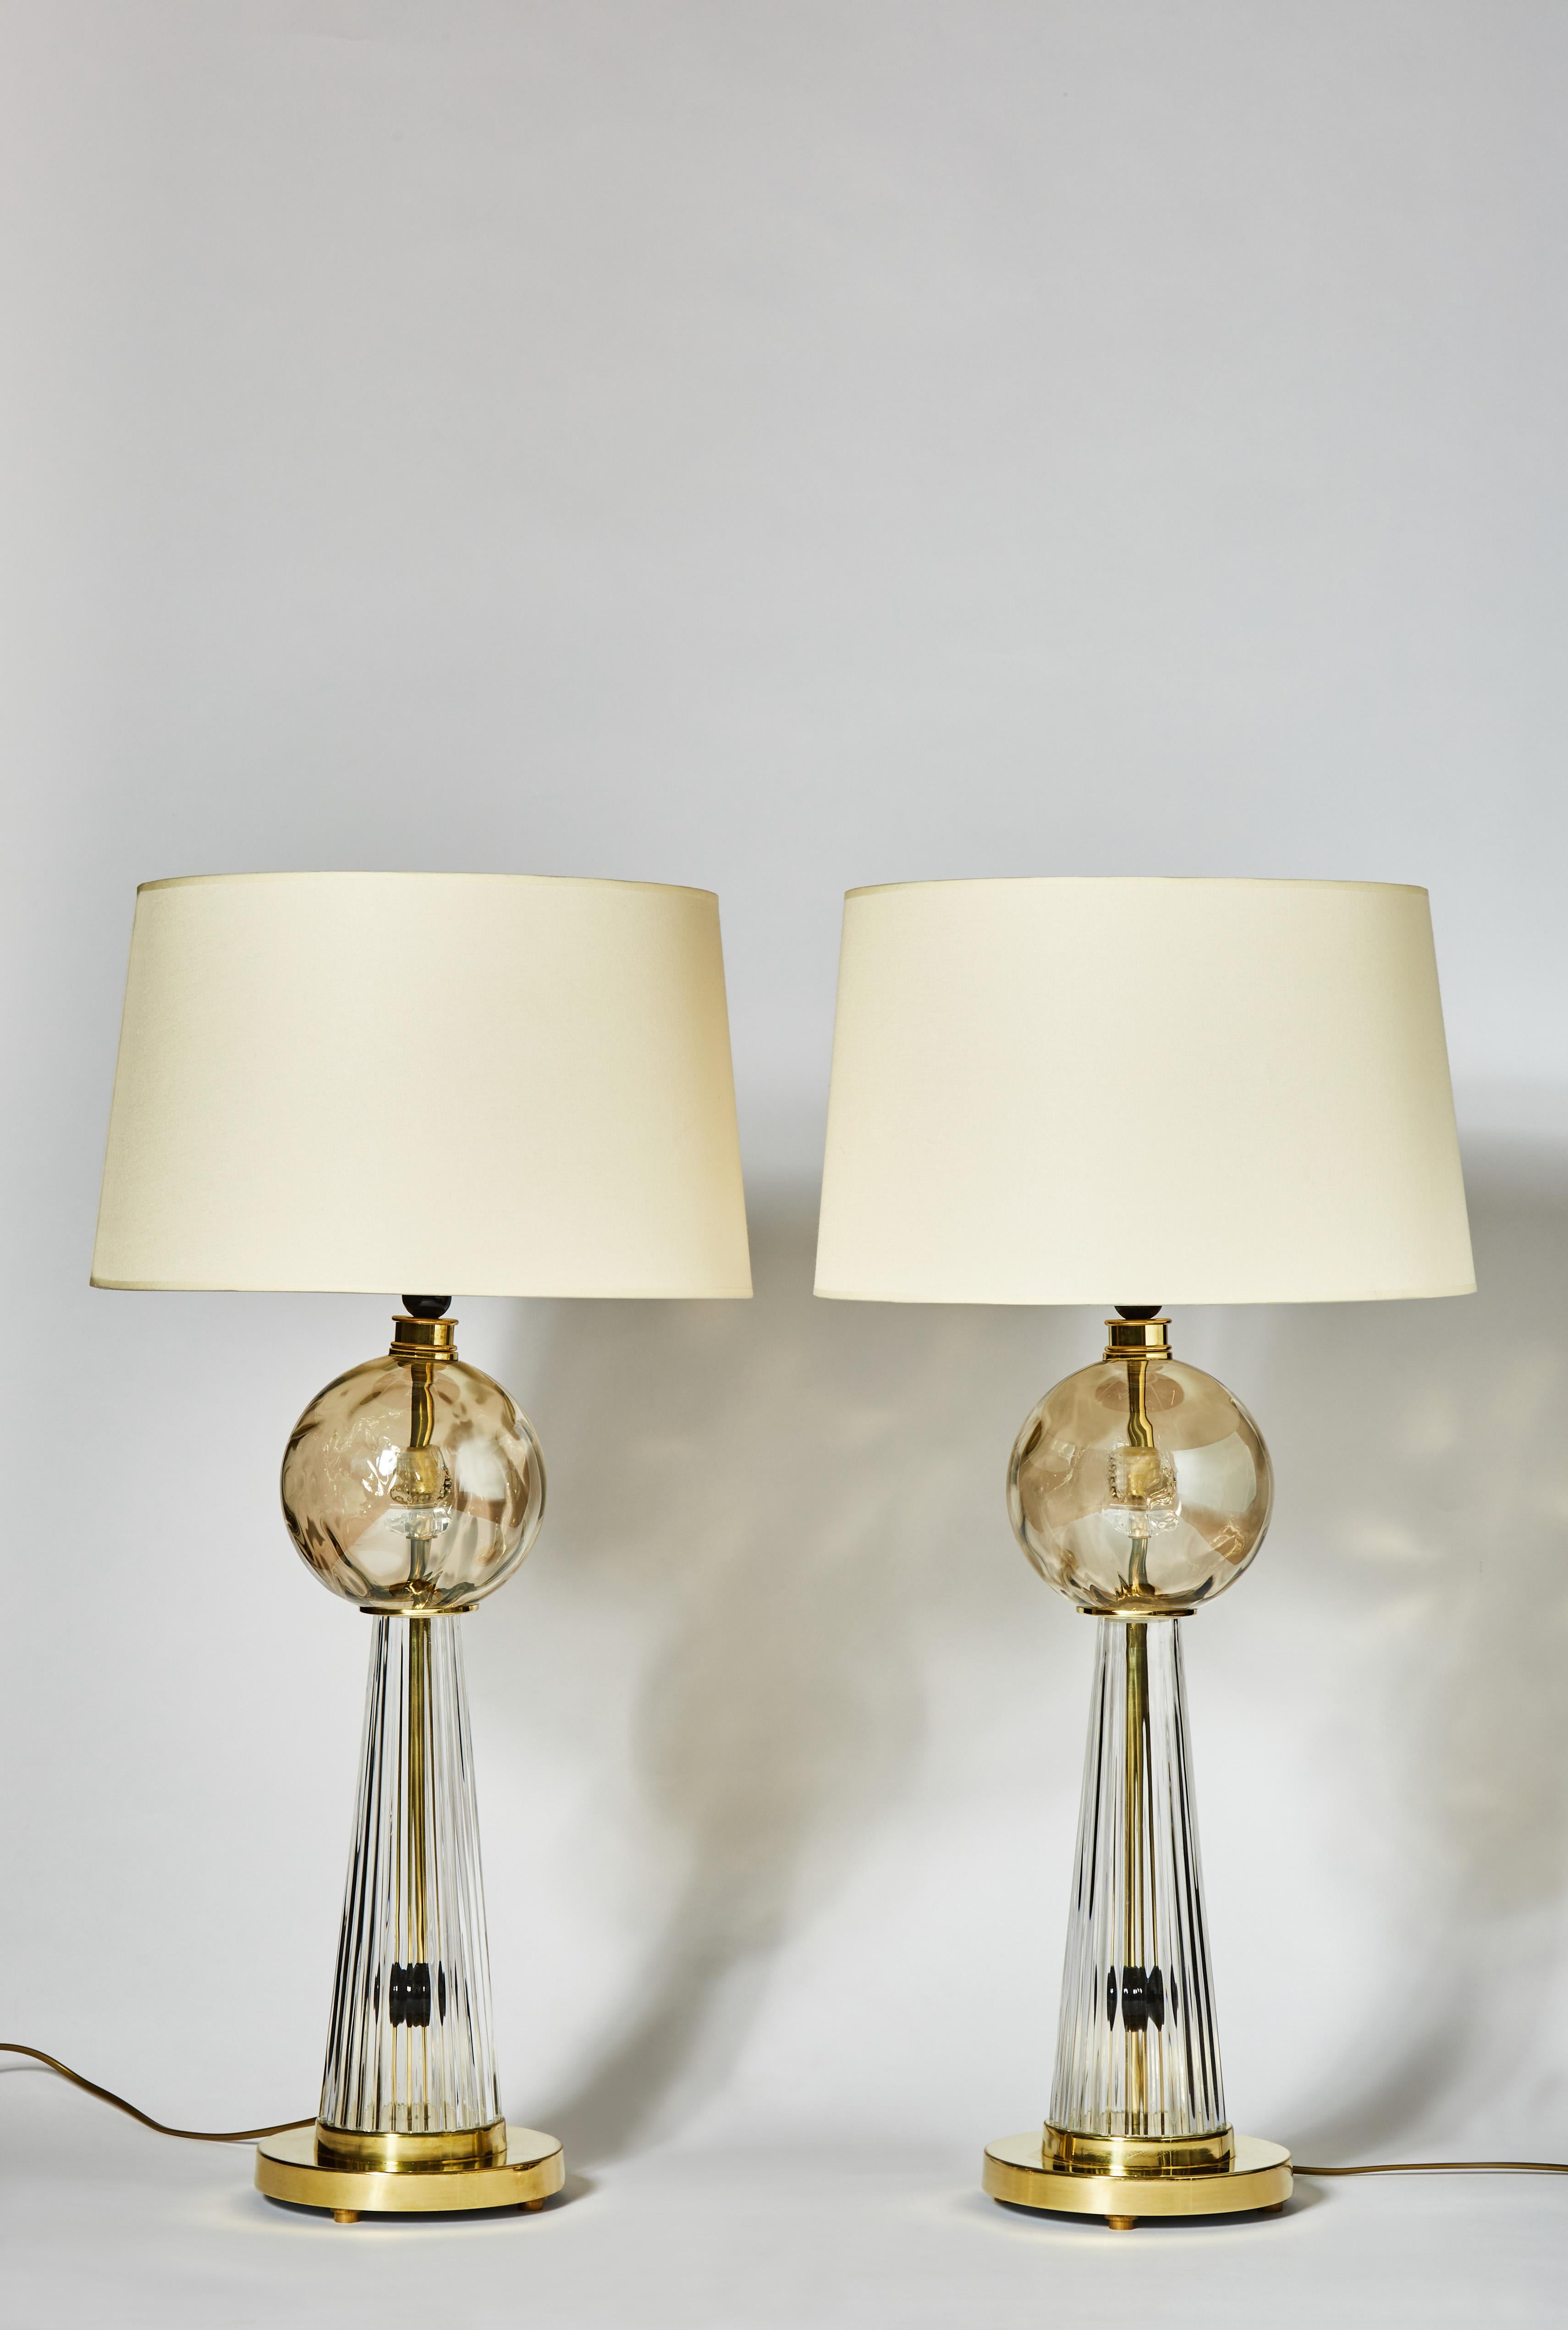 Pair of table lamps made of brass and Murano glass including a beautiful textured golden globe in the center.